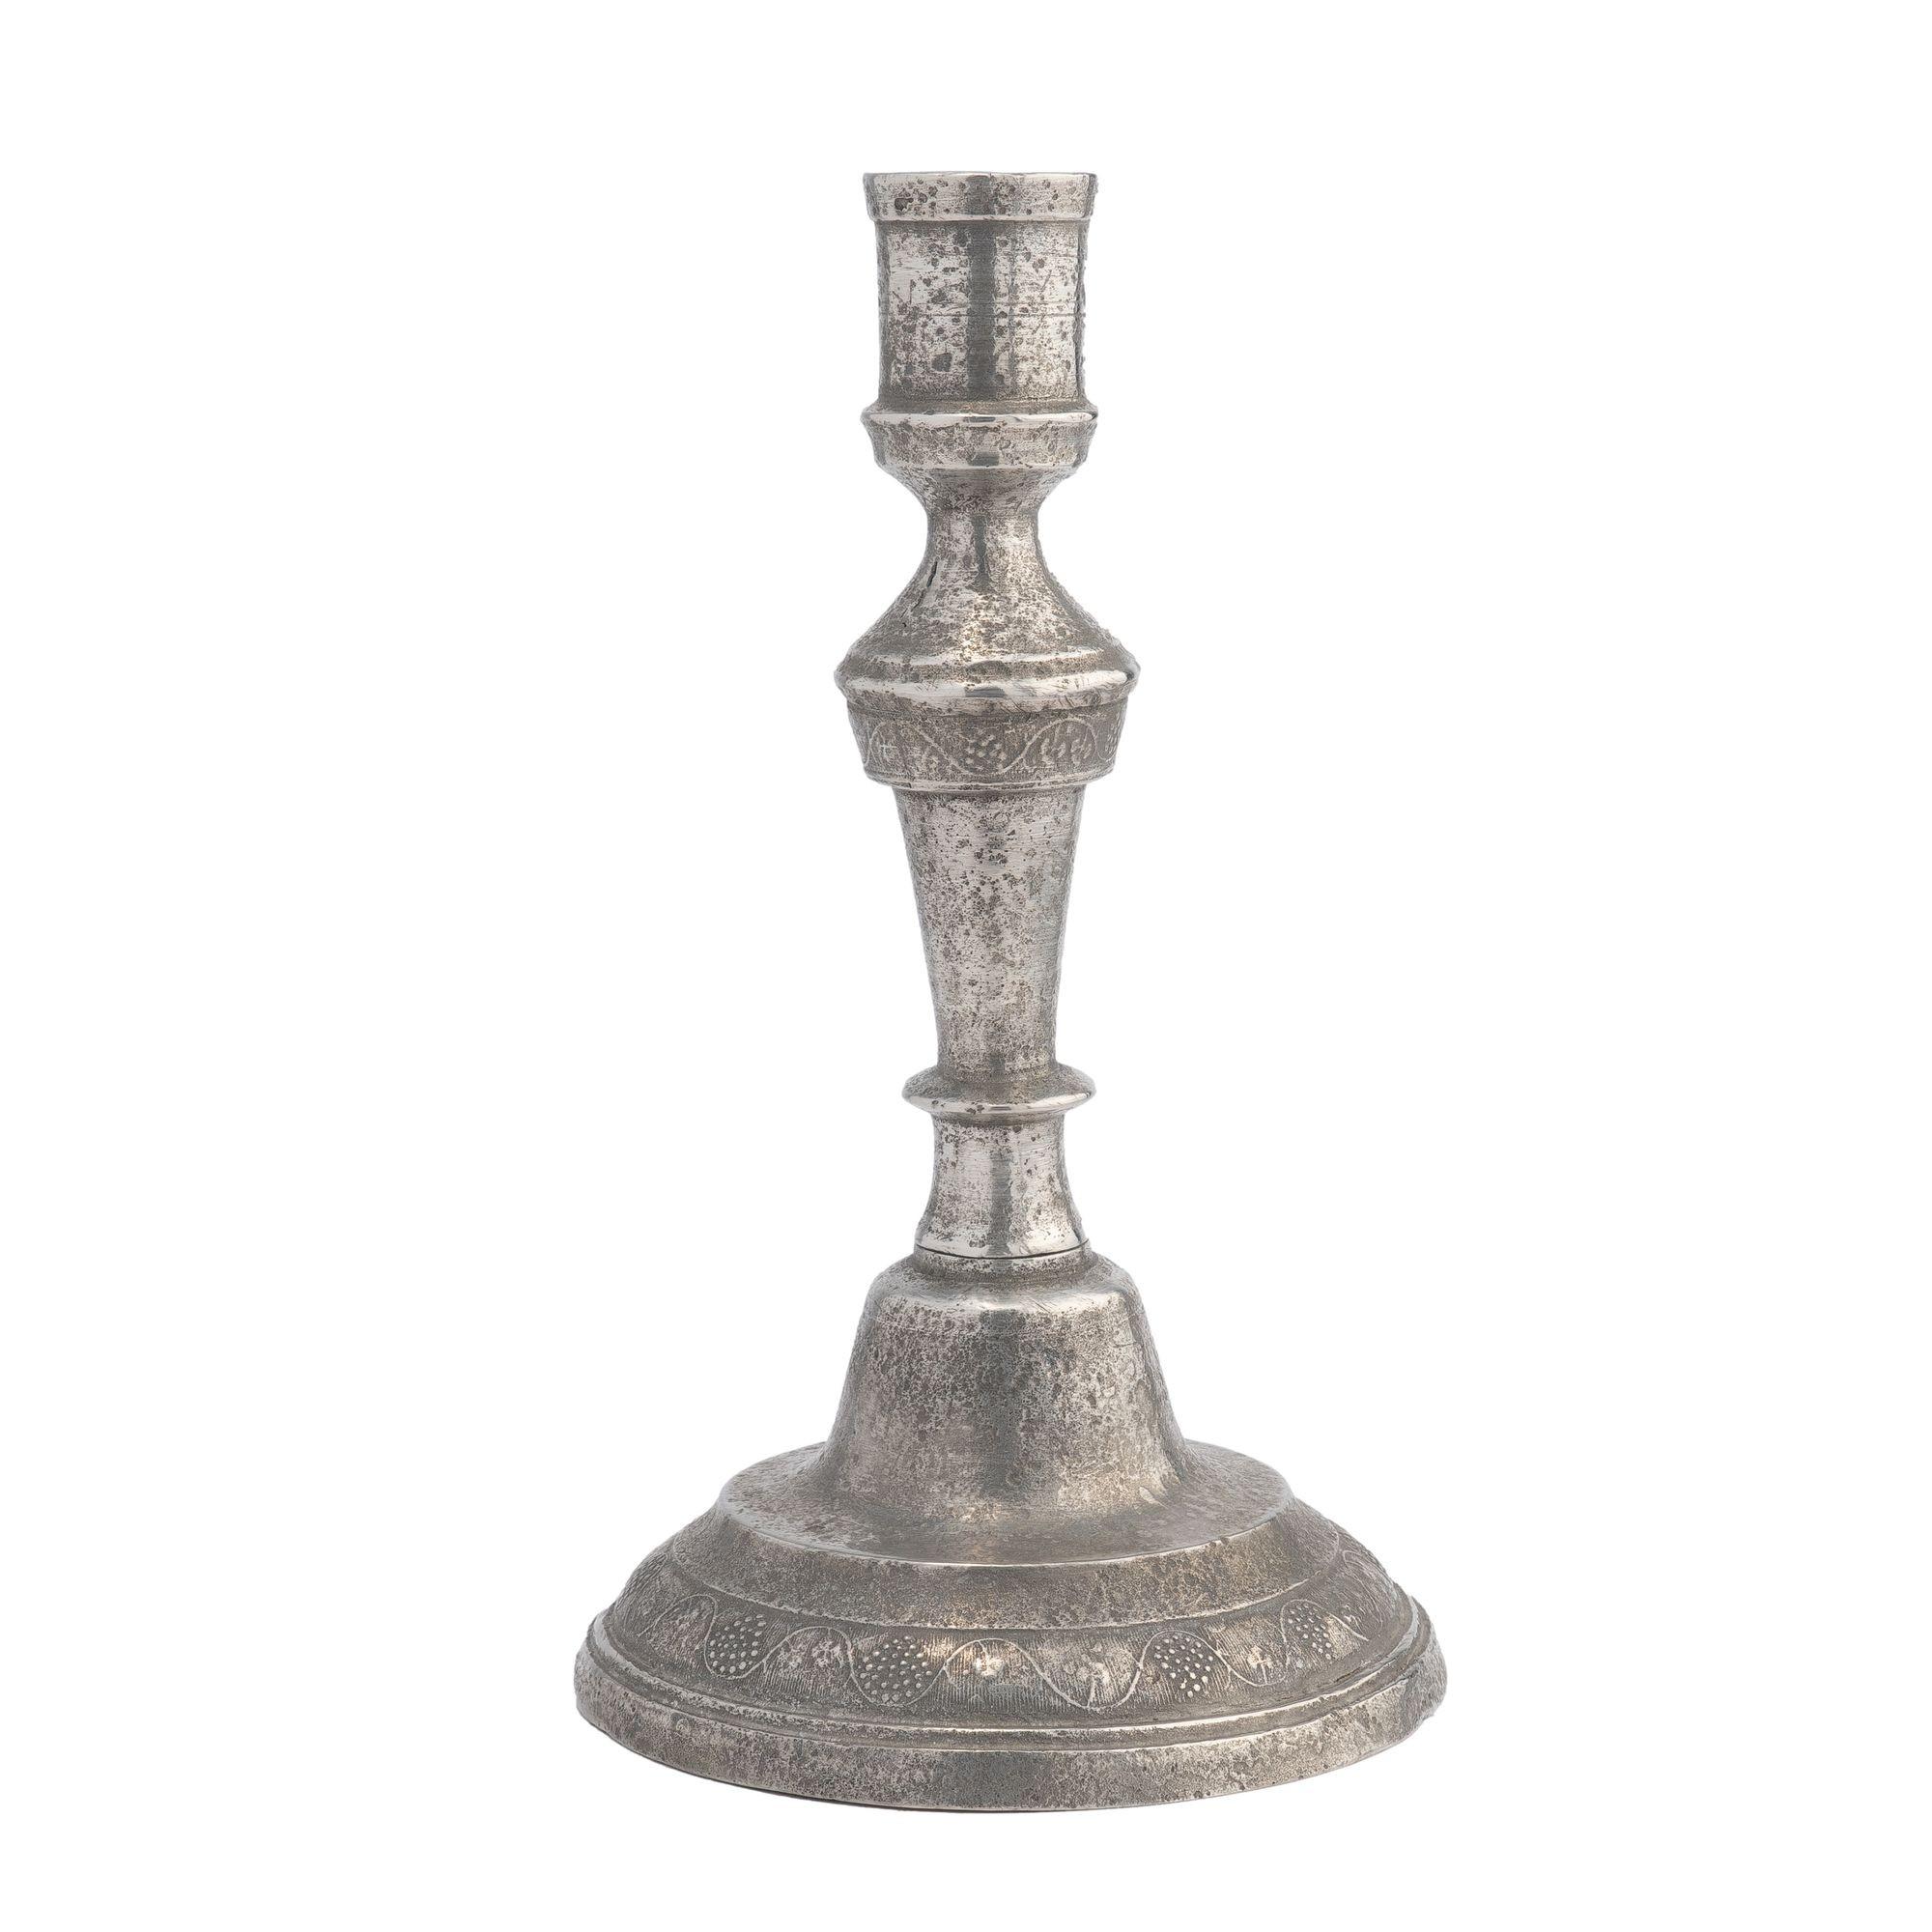 Continental cast pewter candlestick with delicate grape vine motif around the circular domed base and on the cylindrical collar between the candle cup and tapered shaft.

France, circa 1770.